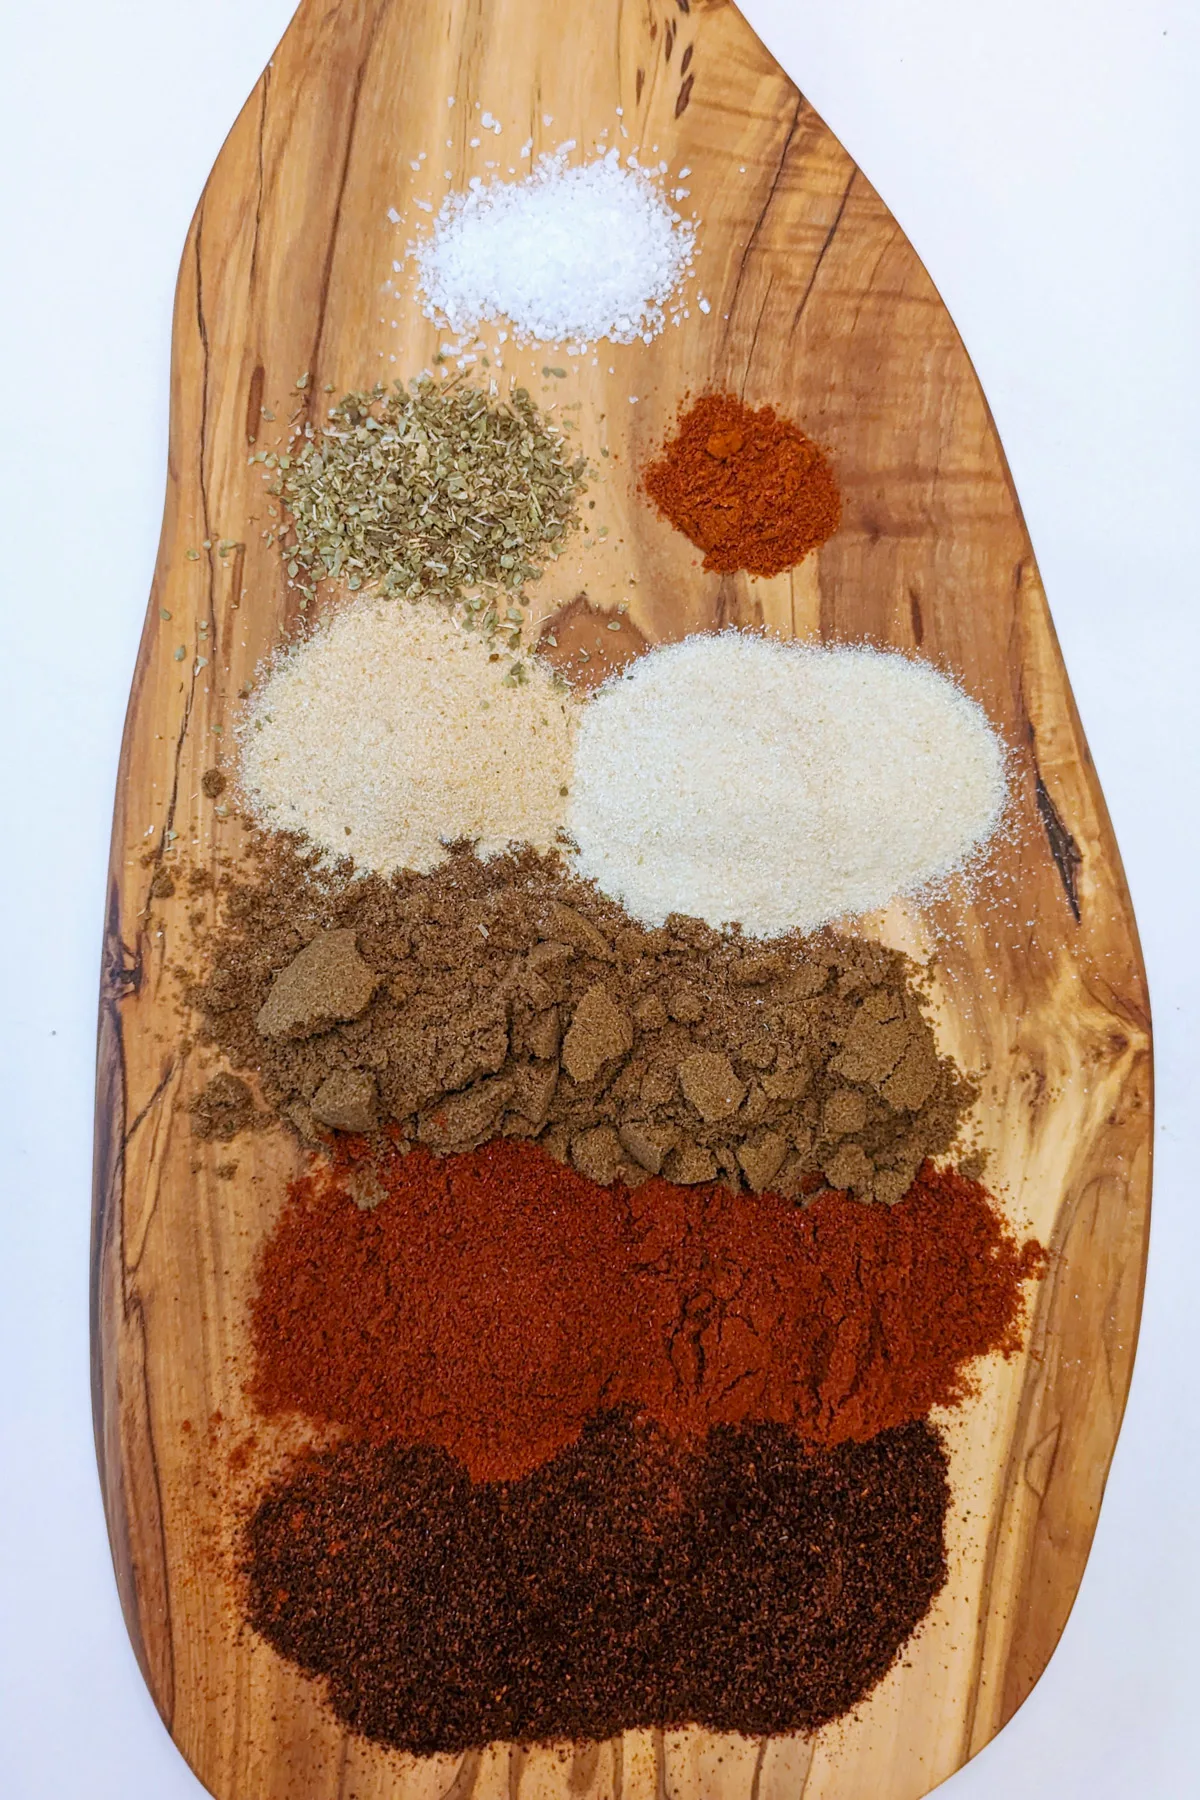 Each of the spices on a wooden board.